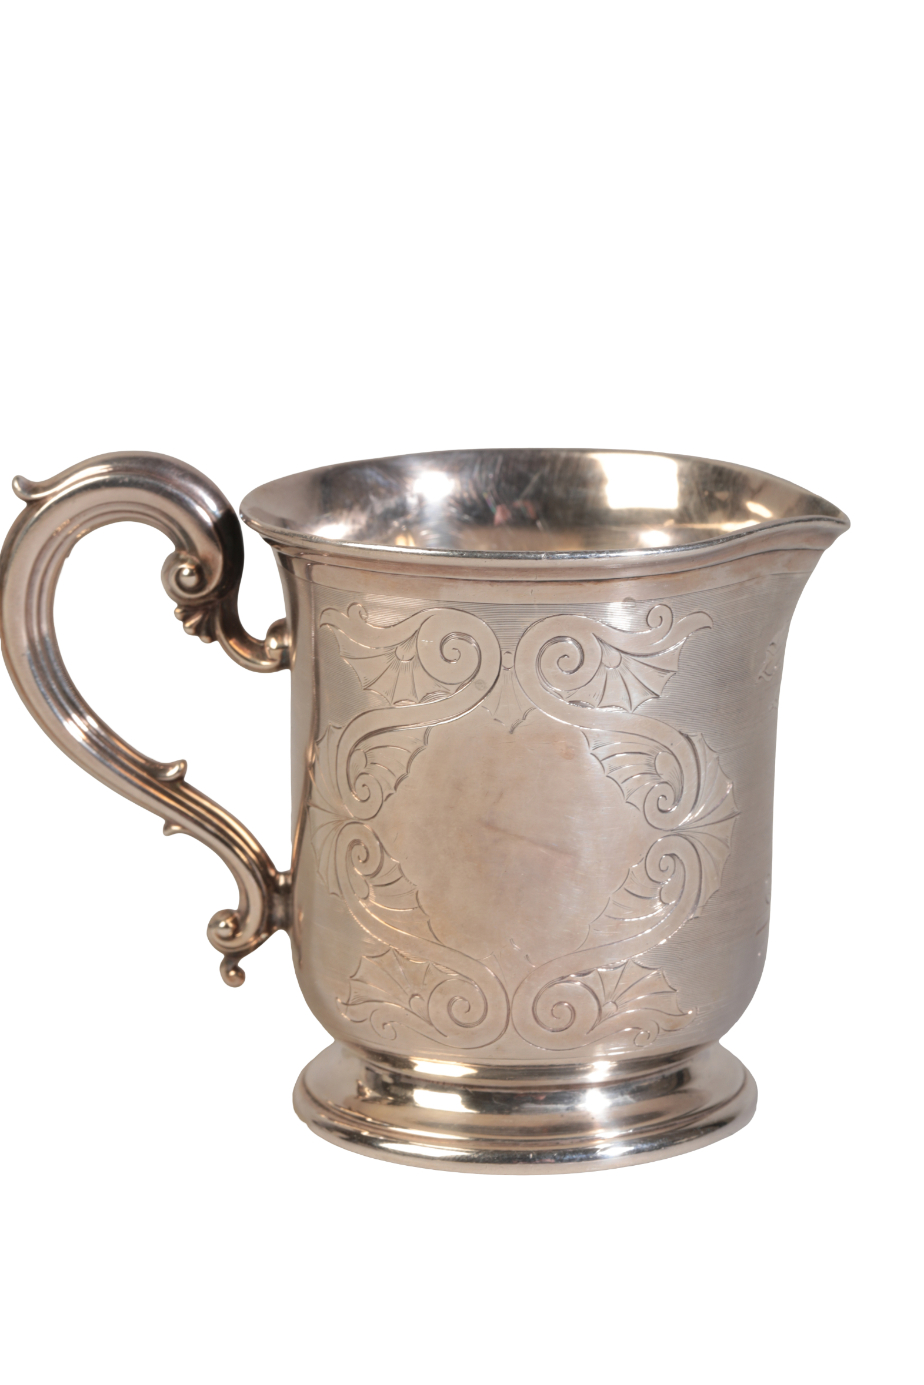 A VICTORIAN SILVER CHRISTENING JUG - Image 2 of 3